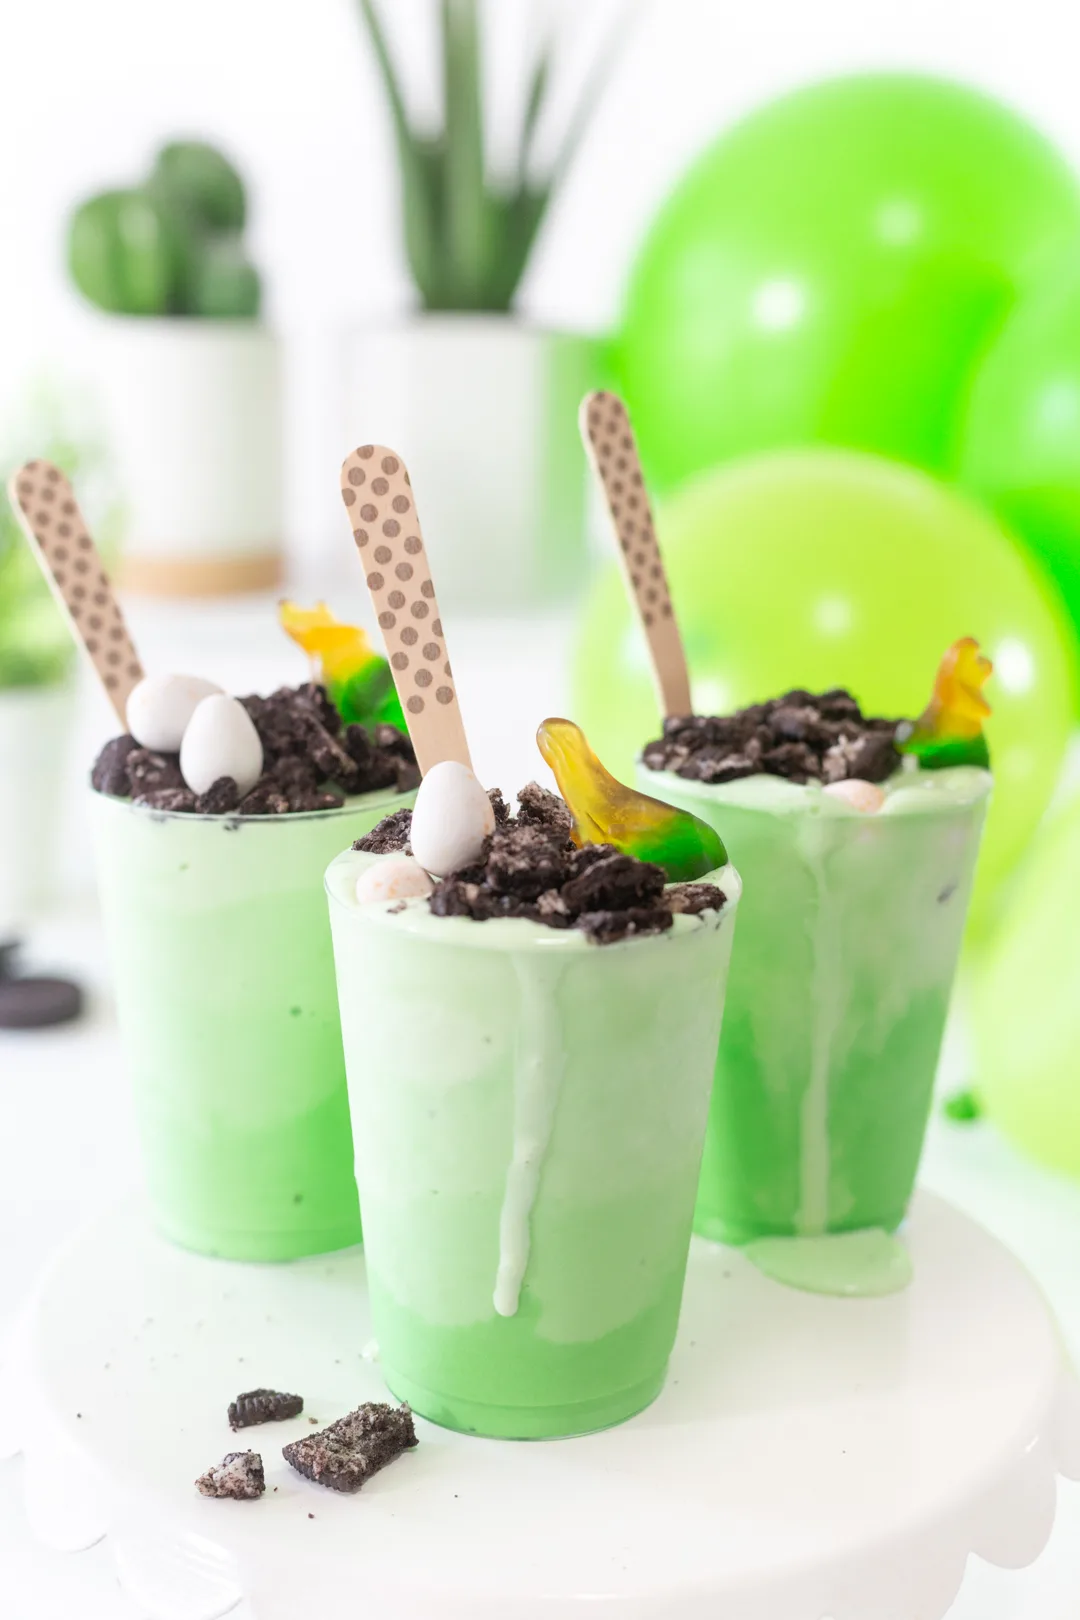 Dino sundaes up close. Pretty green layers of ice cream topped with crushed OREO cookies